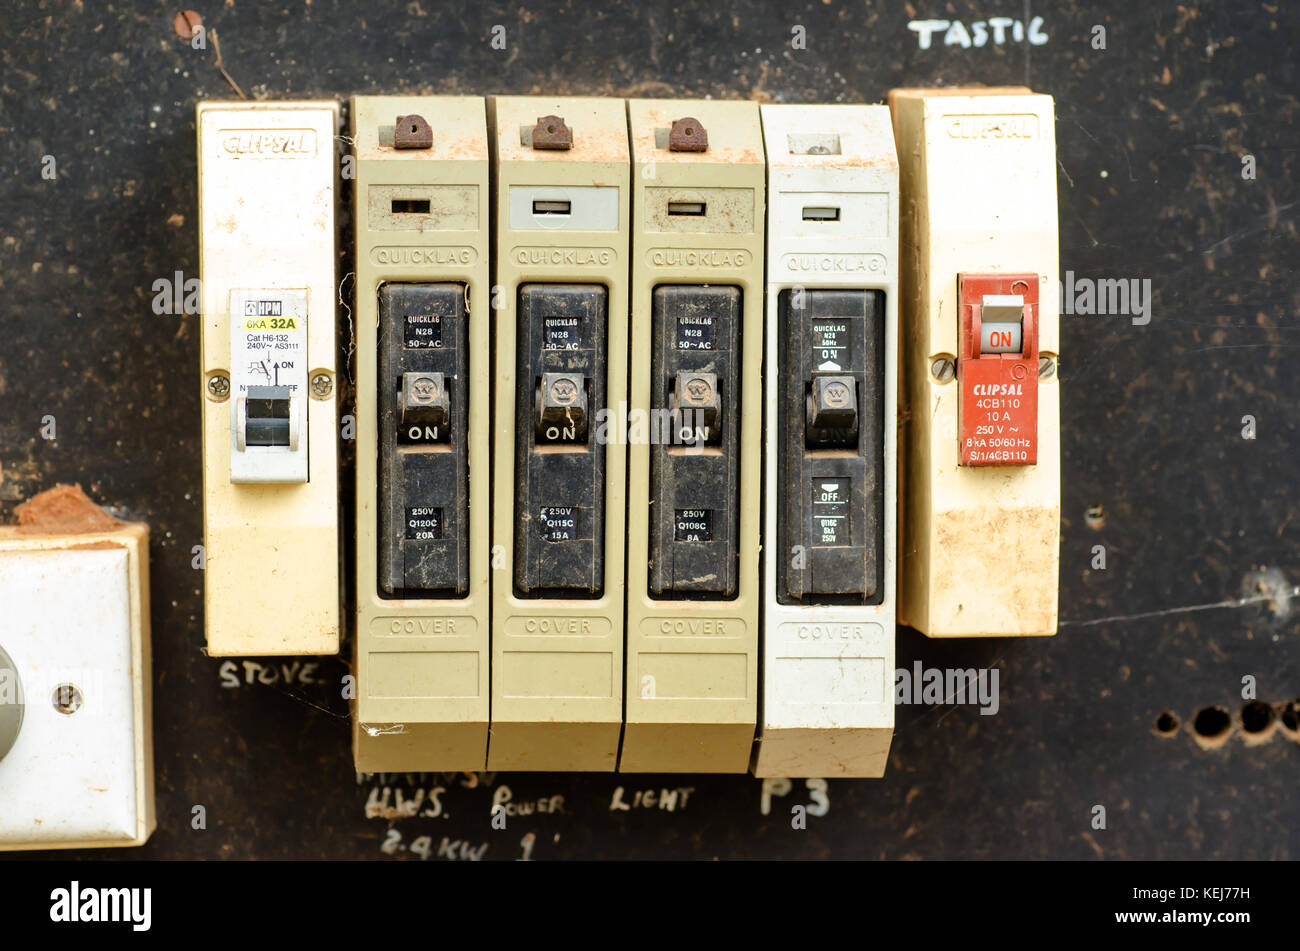 Old meter box circuit breakers for domestic electricity supply. Stock Photo